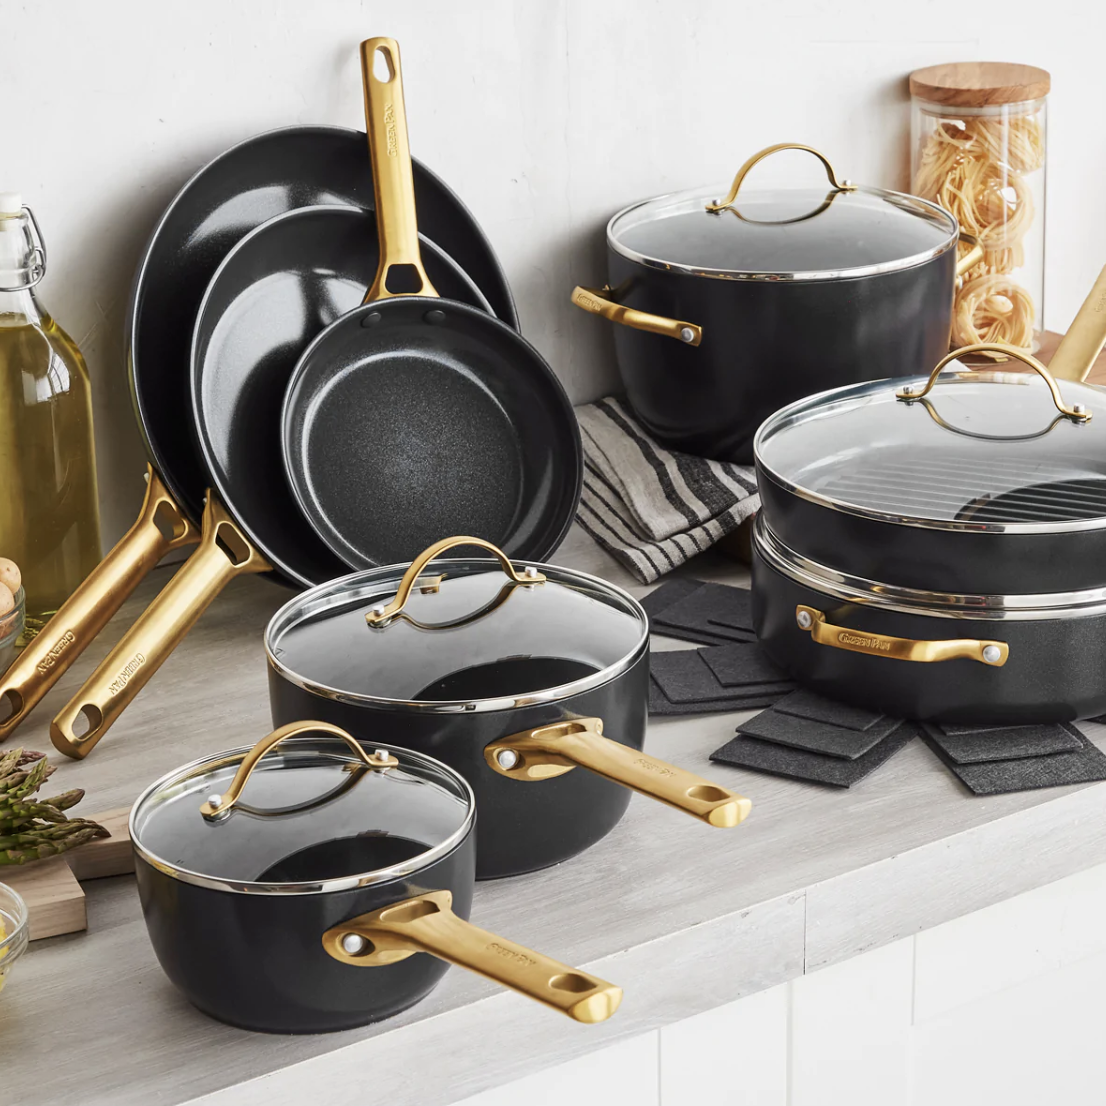 the 16-piece cookware set with pots, pans, and skillets with gold-tone handles